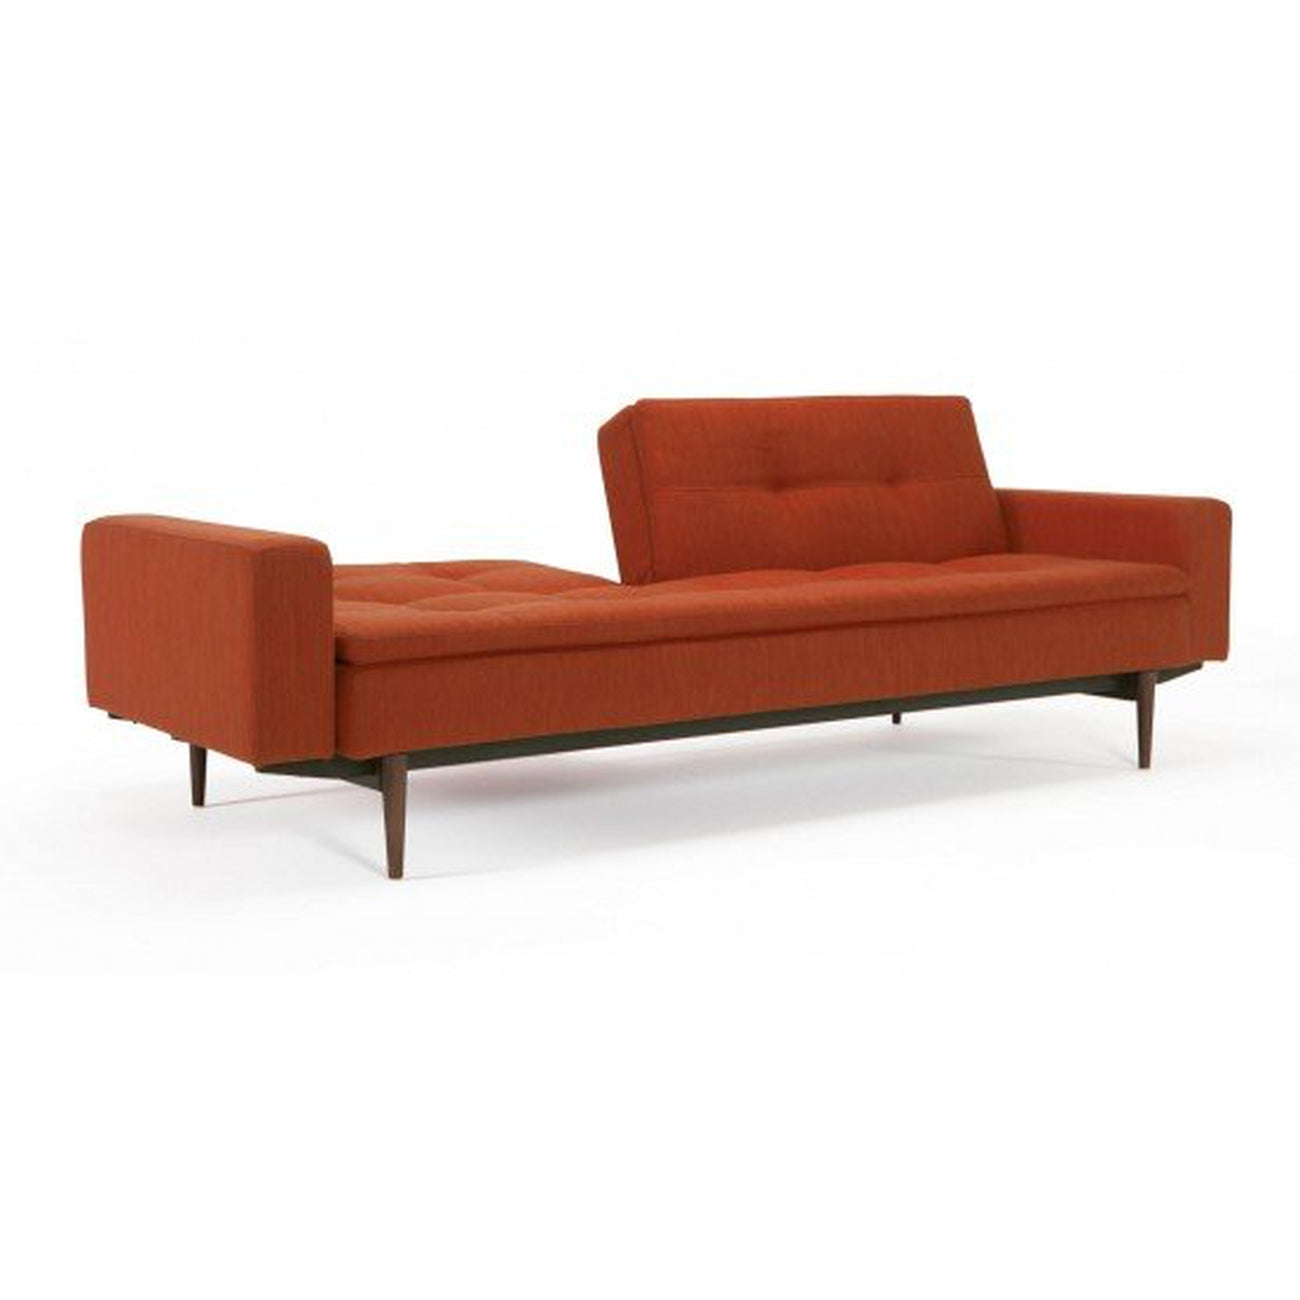 Dublexo Deluxe Sofa W/Arms,DARK WOOD-Innovation Living-INNO-94-741050020527-10-3-SofasMixed Dance Natural-5-France and Son